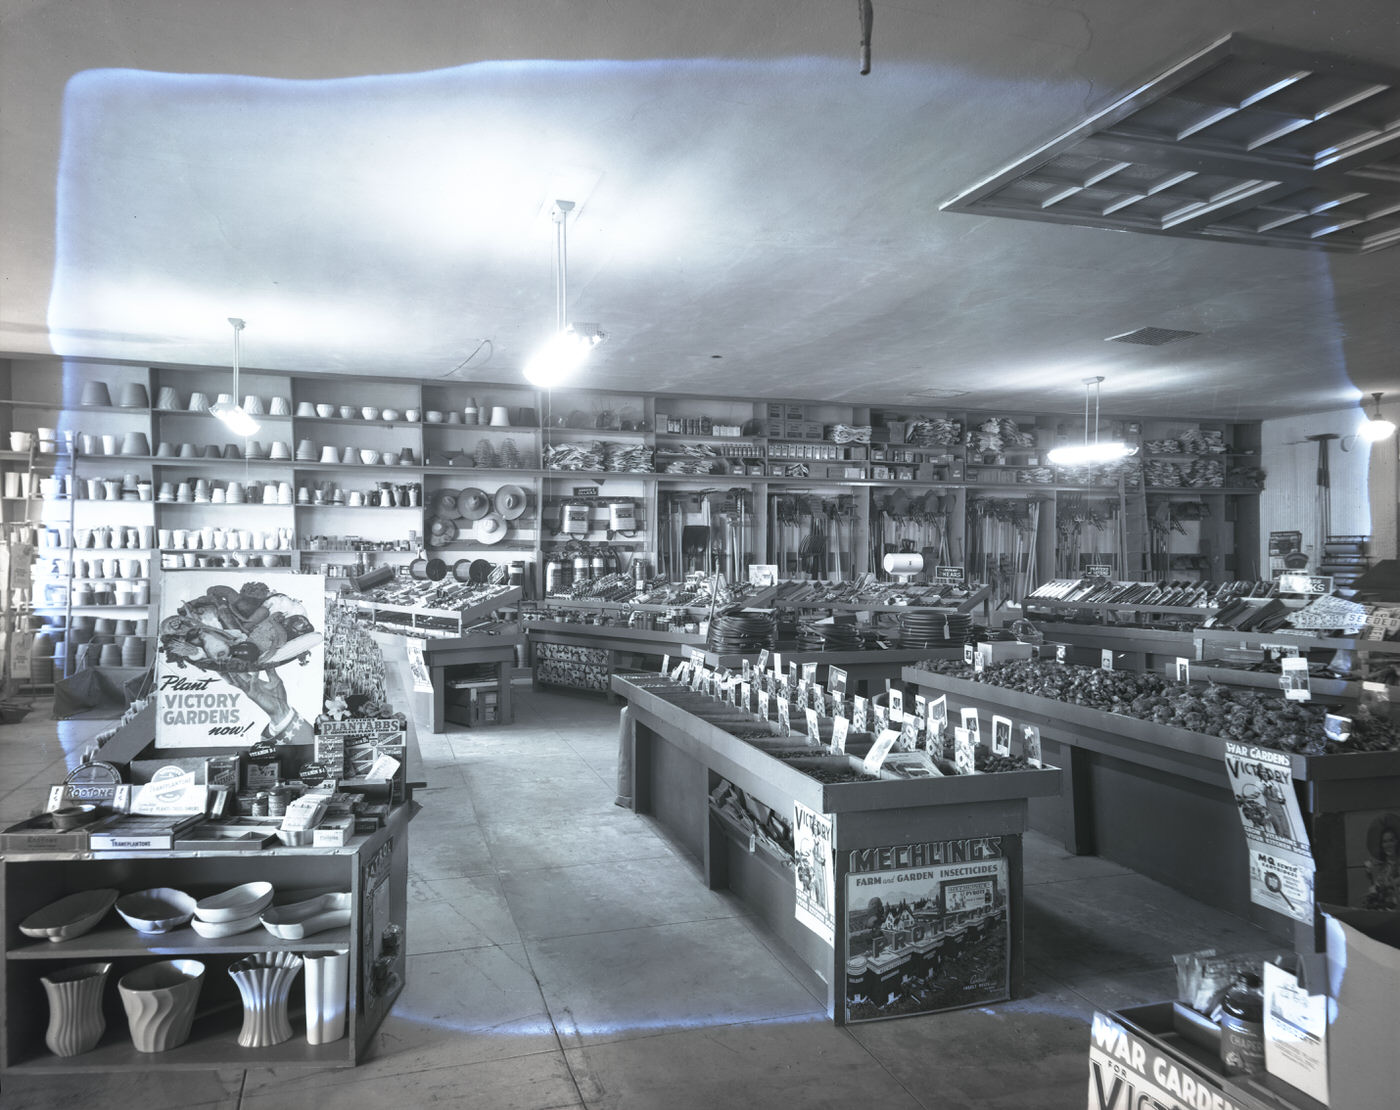 Liefgreen Seed Co. Store Interior, 1943